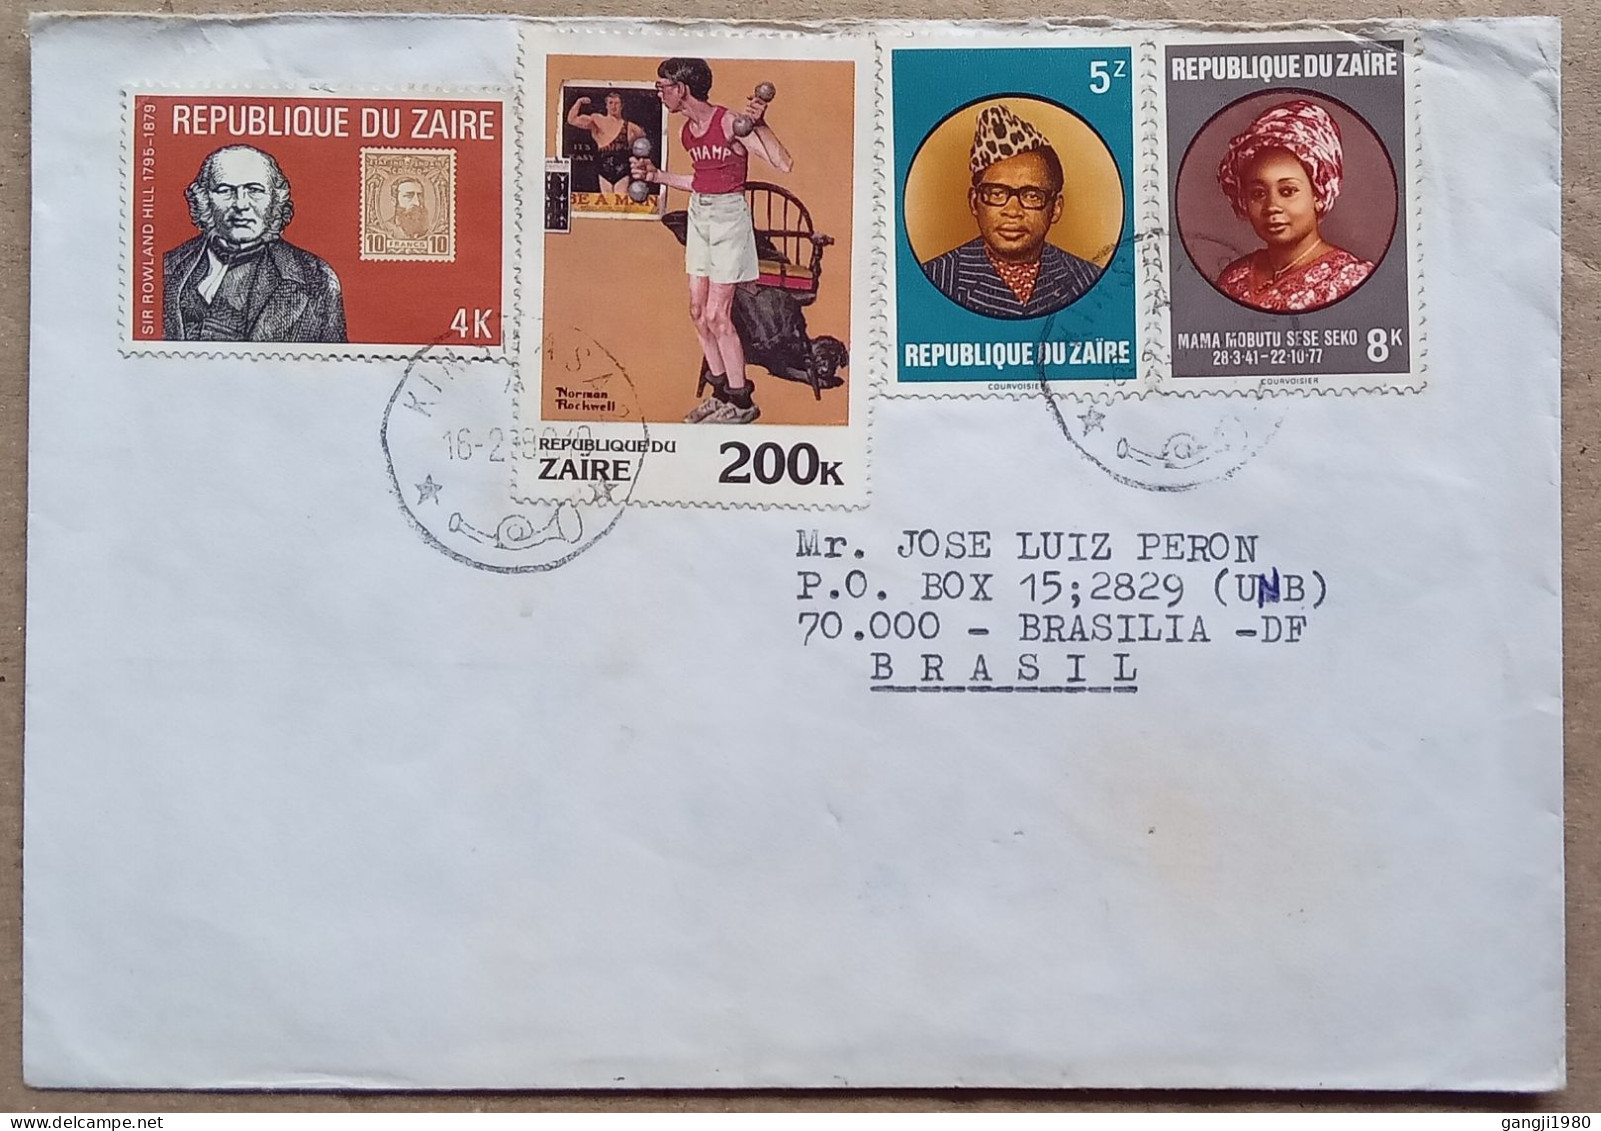 ZAIRE 1980, COVER USED TO BRAZIL, 6 STAMP, ROWLAND HILL, STAMP ON STAMP, PRESIDENT MOBUTU, MAMA MOBUTU, EXERCISING, KINA - Storia Postale